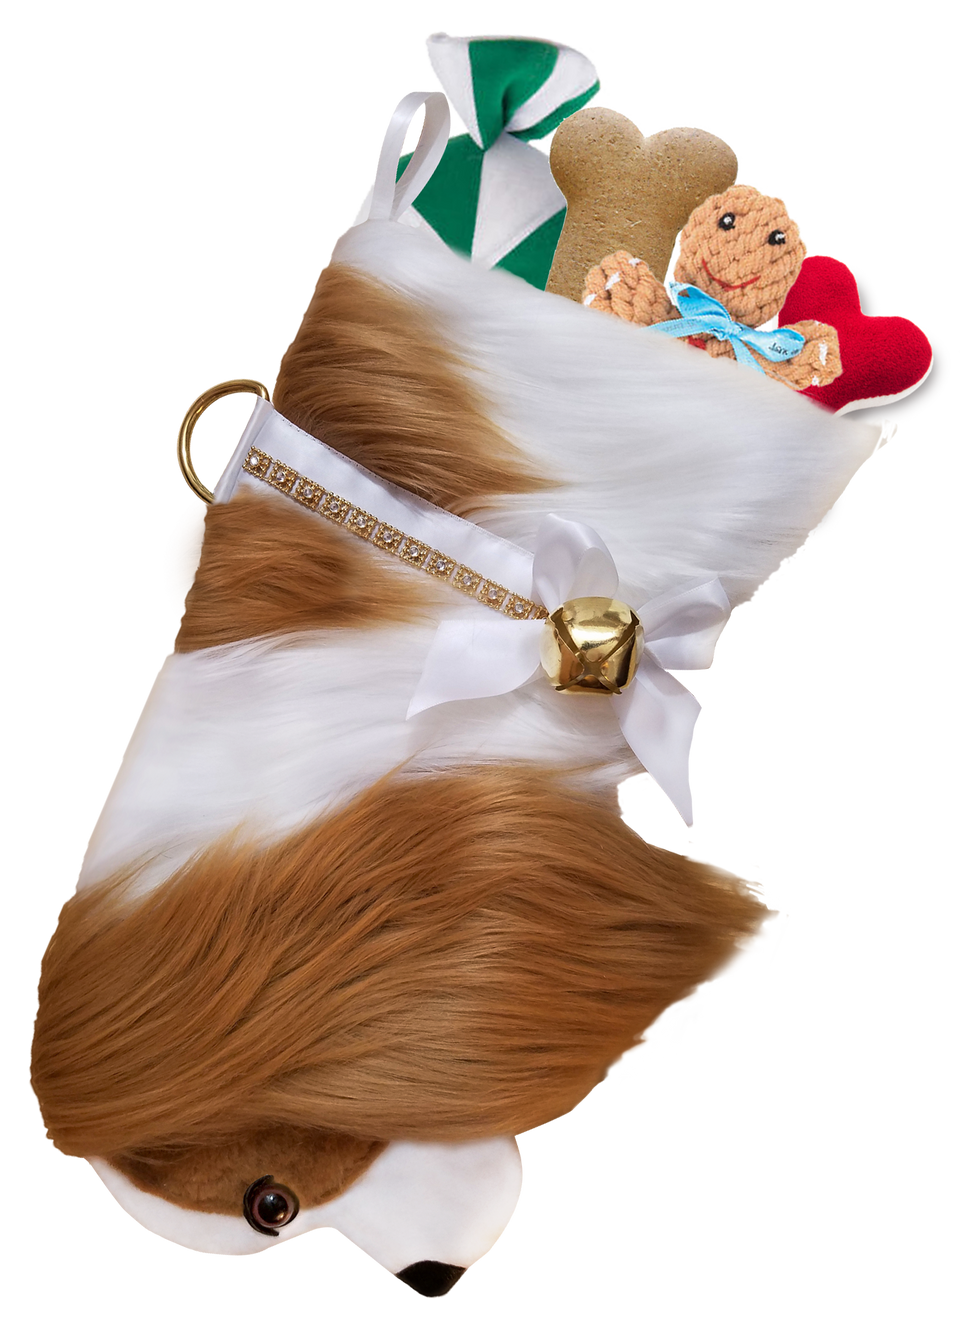 This Cavalier King Charles Spaniel dog Christmas stocking is the perfect gift for stuffing toys and treats into to spoil your fur baby for Christmas, or whatever holiday you celebrate!